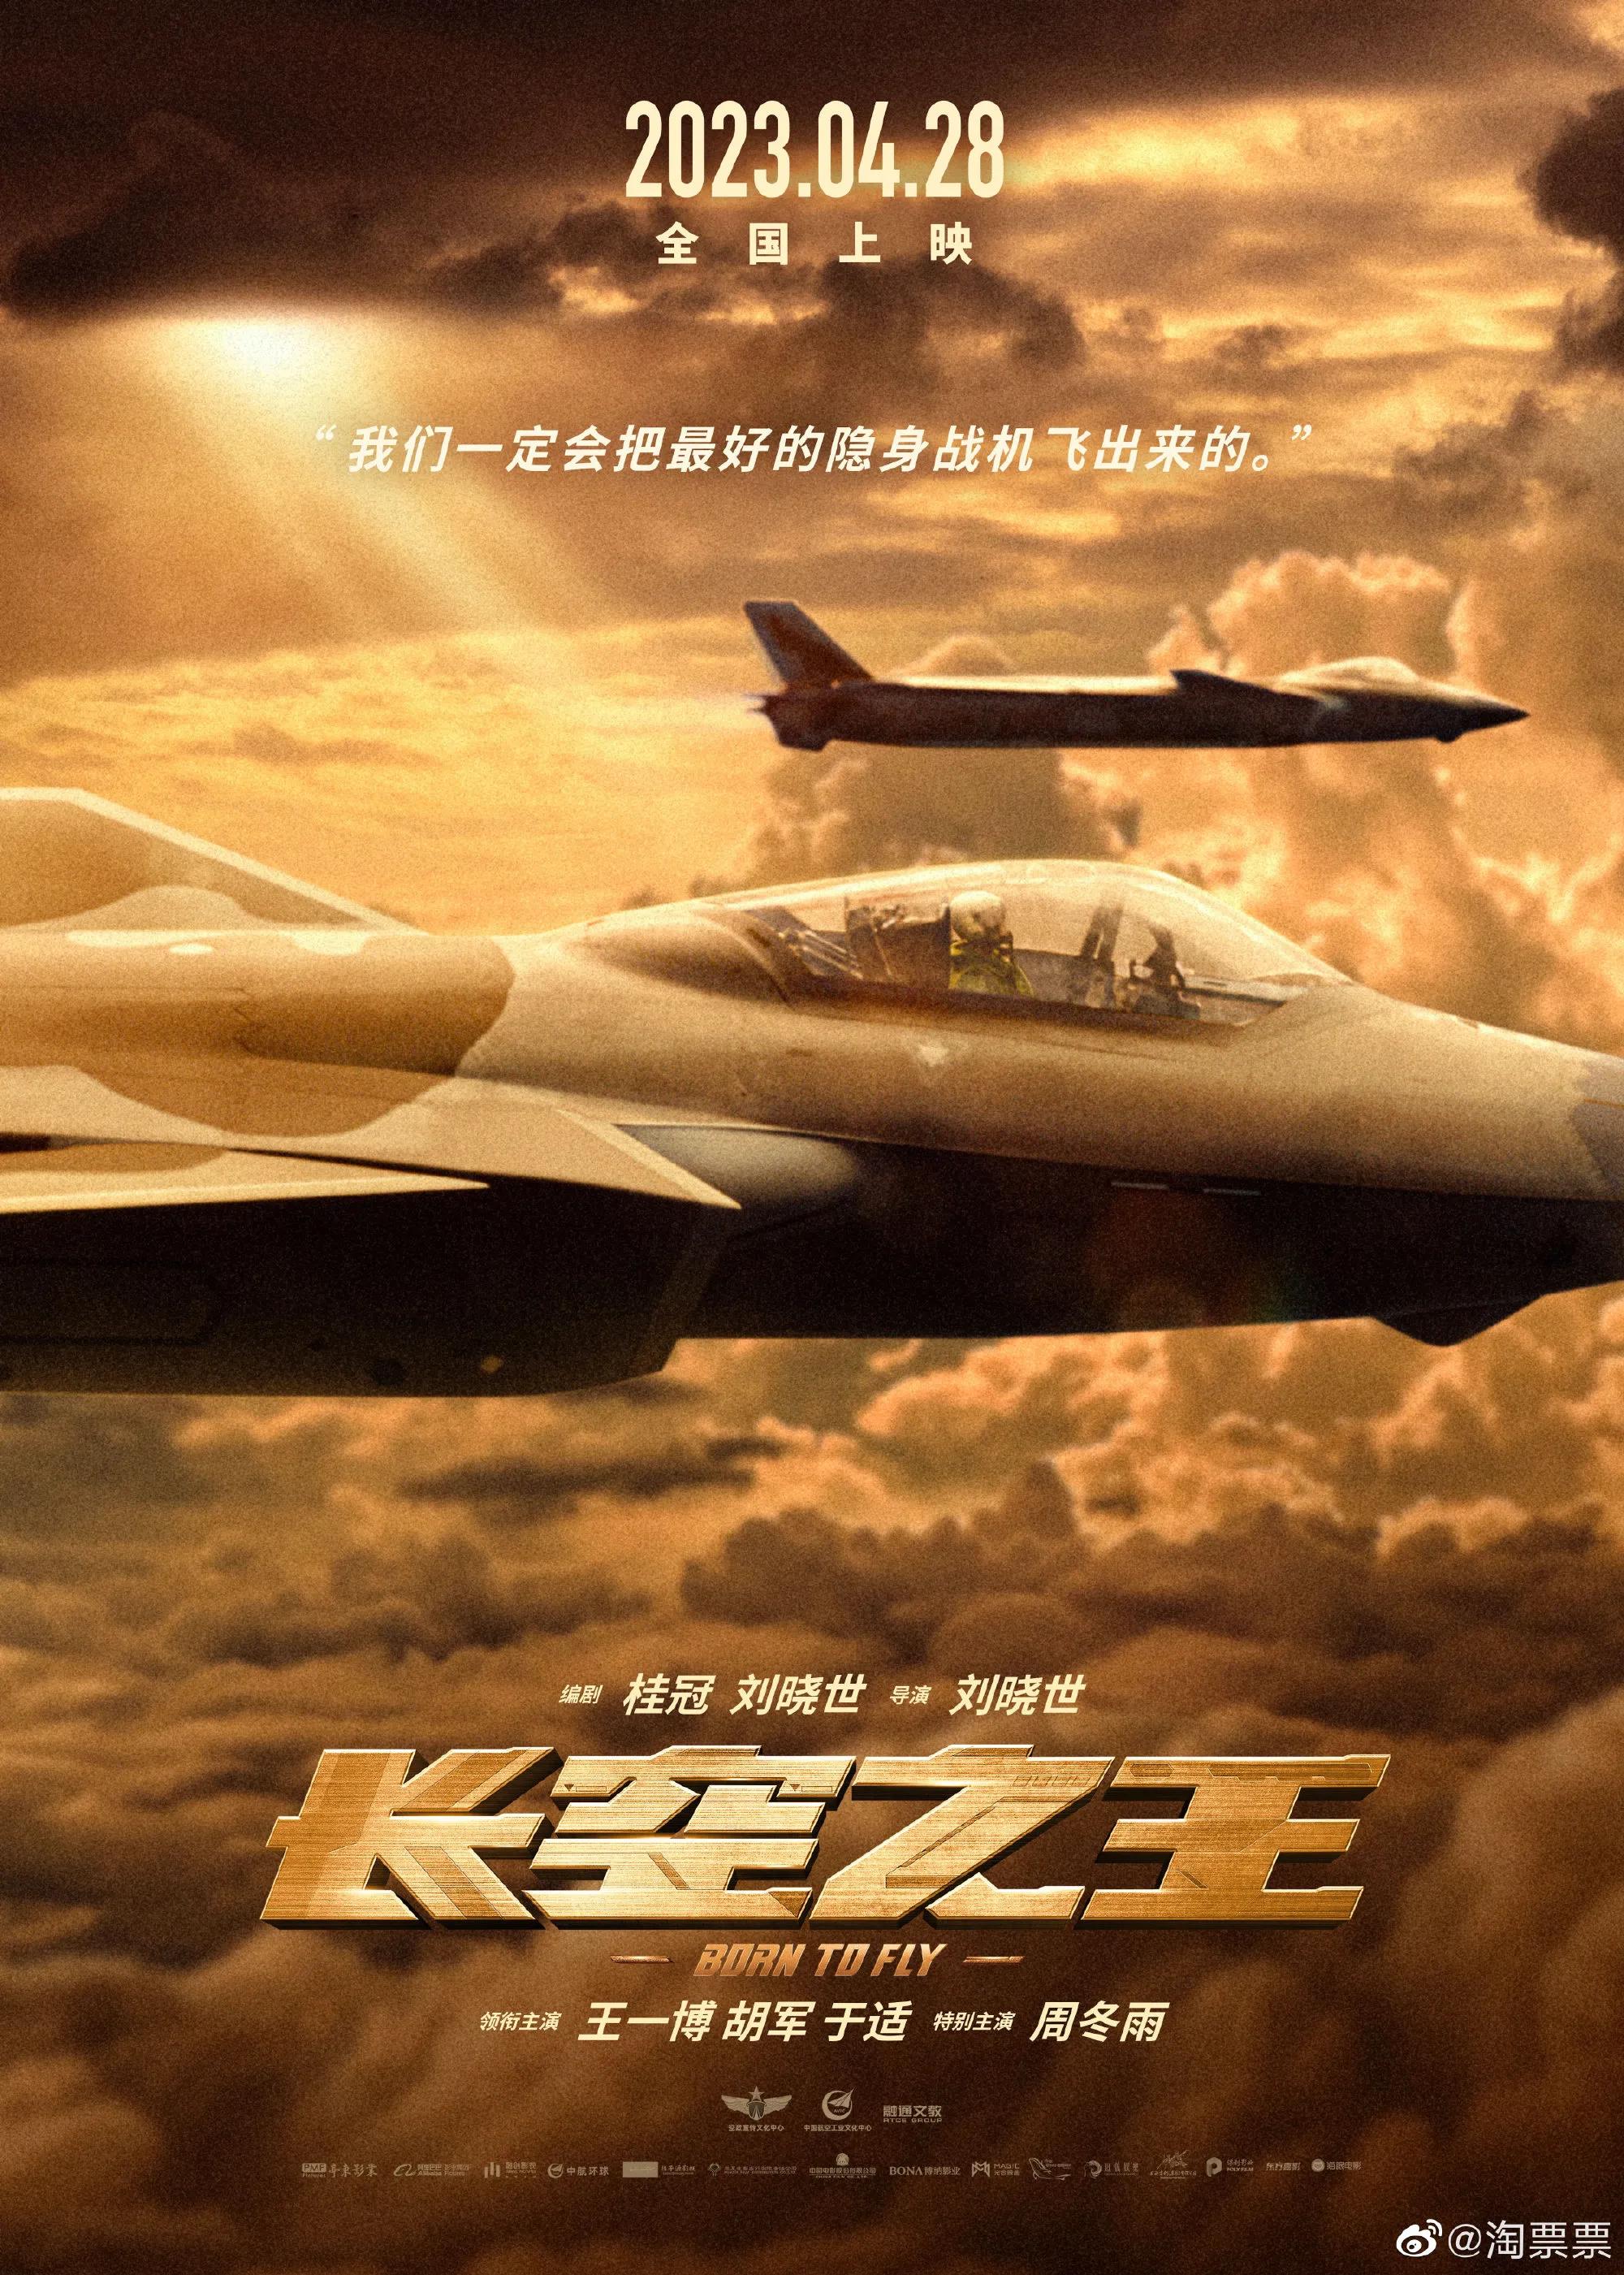 The movie "The King of the Sky" was specially screened, and the